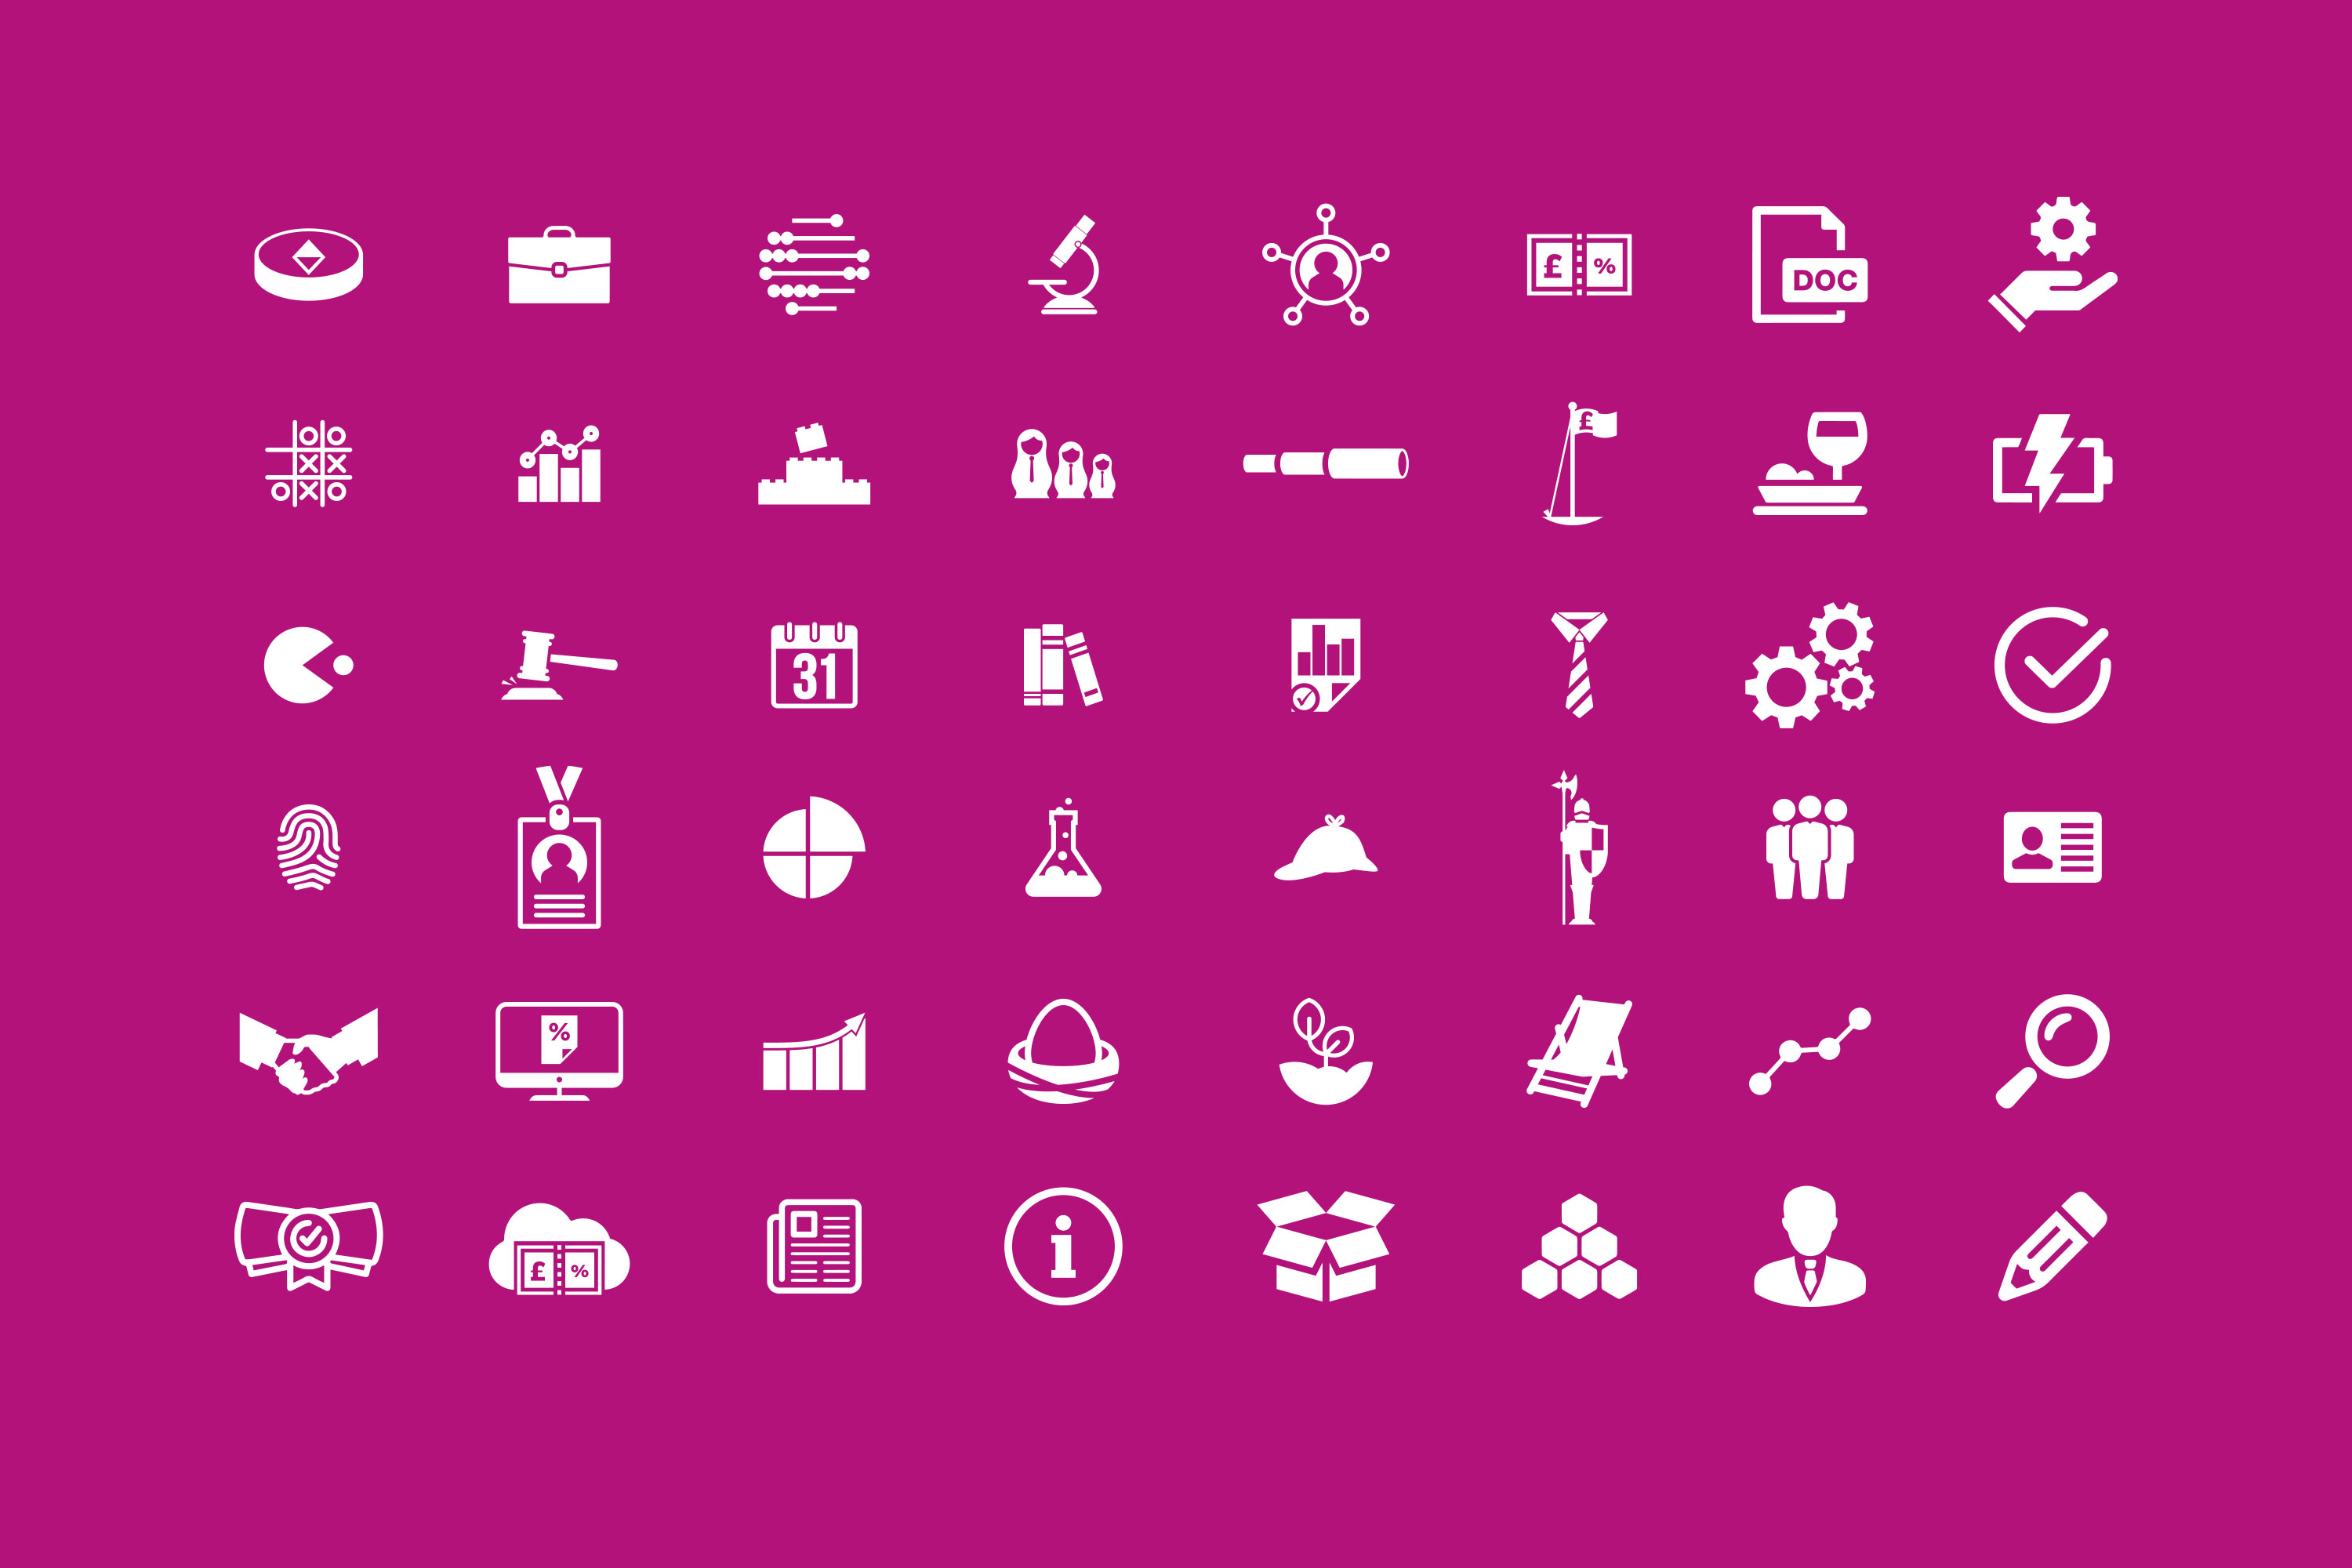 Service icons developed for Randall & Payne by Mighty, digital agency